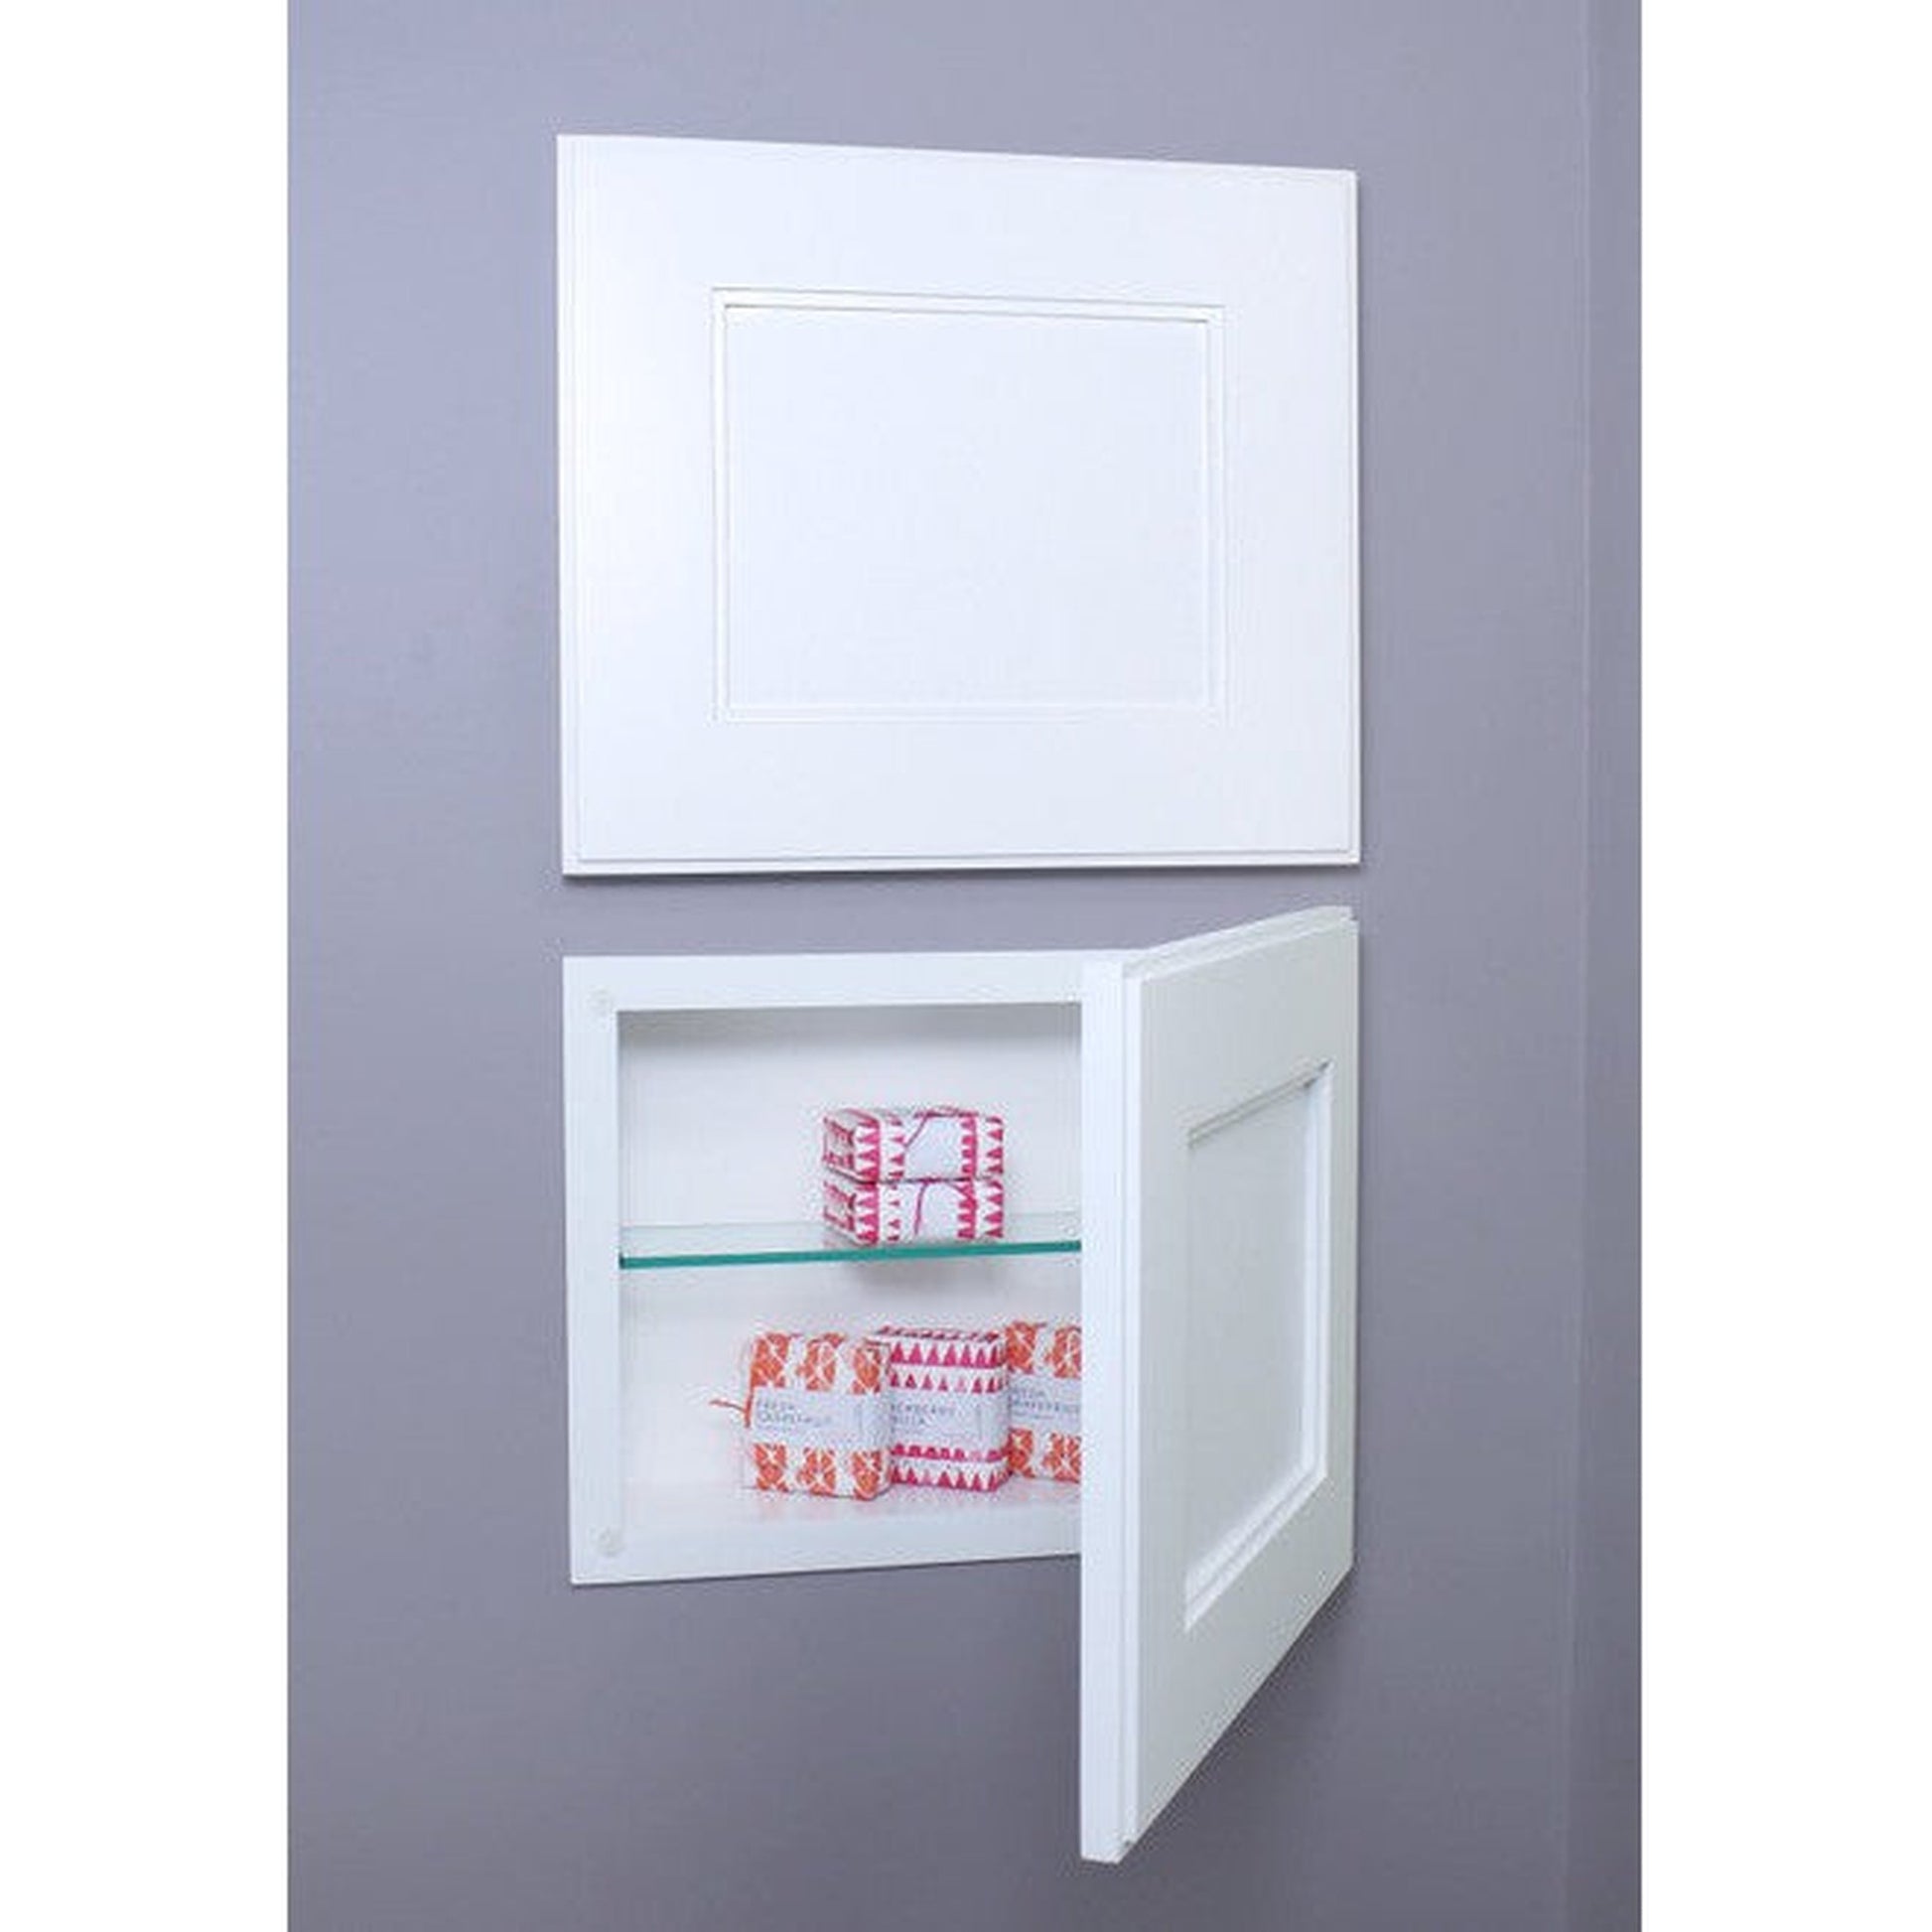 Fox Hollow Furnishings 11" x 14" White Compact Landscape Shaker Style Special 6" Depth Recessed Medicine Cabinet With Mirror